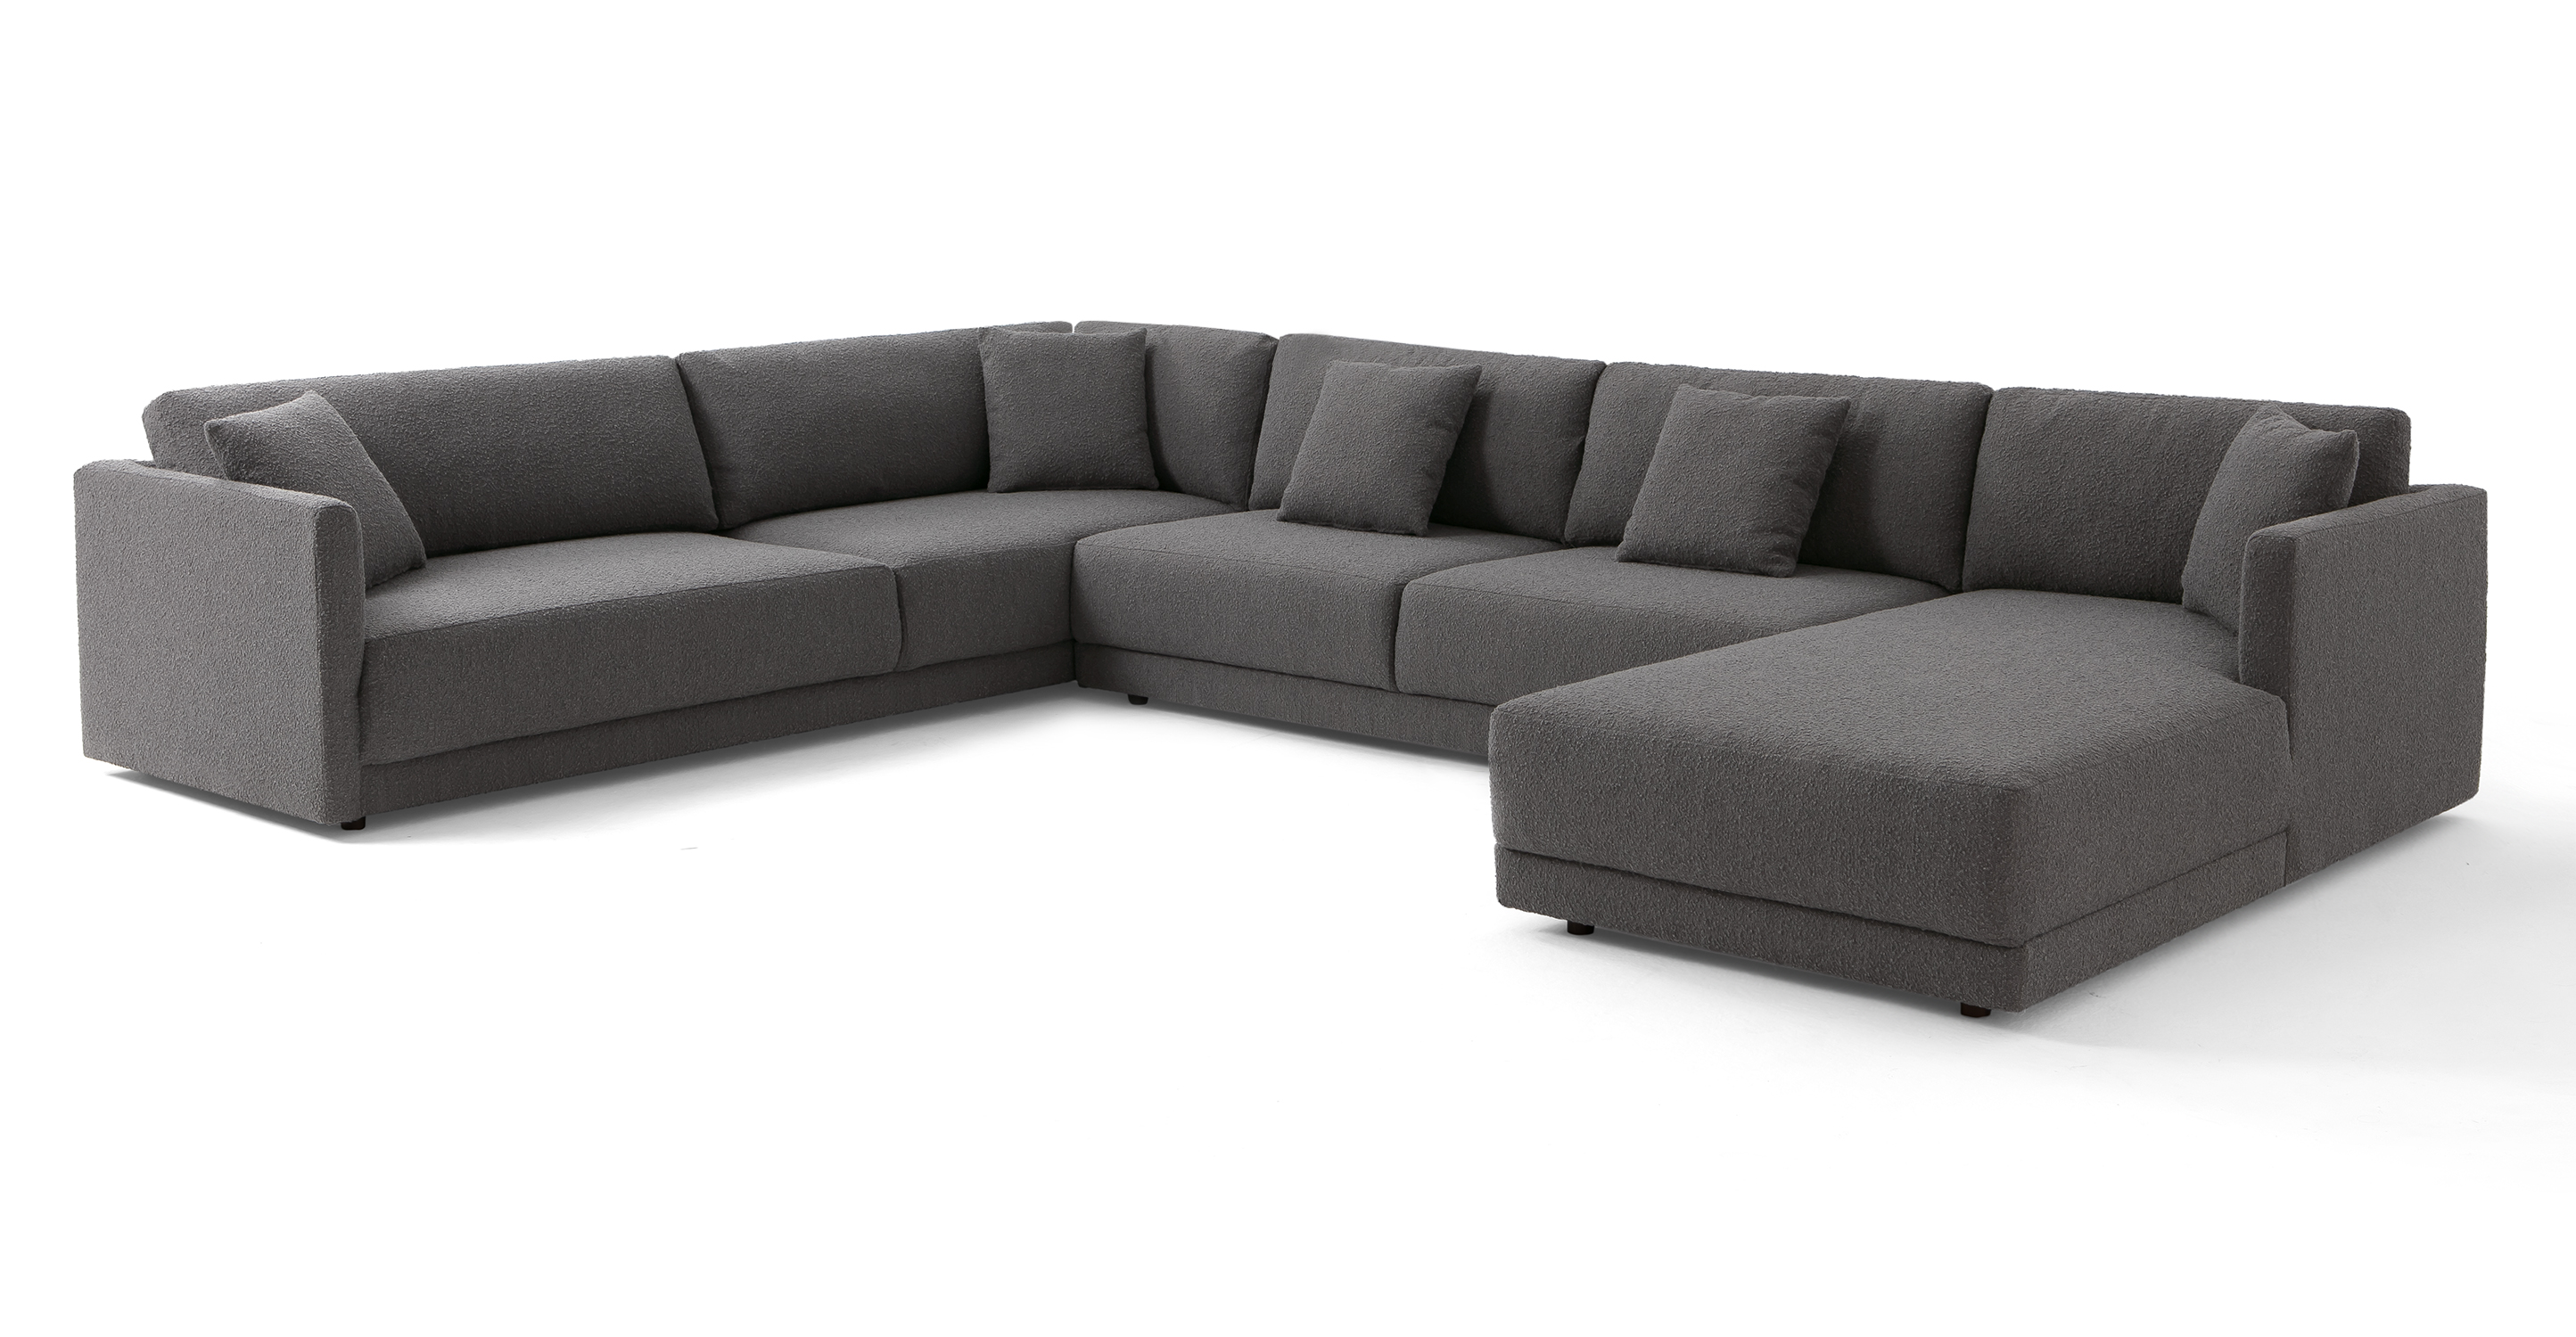 Domus 155" 3-pc 3-Sided Sofa Sectional Right, Gris Boucle